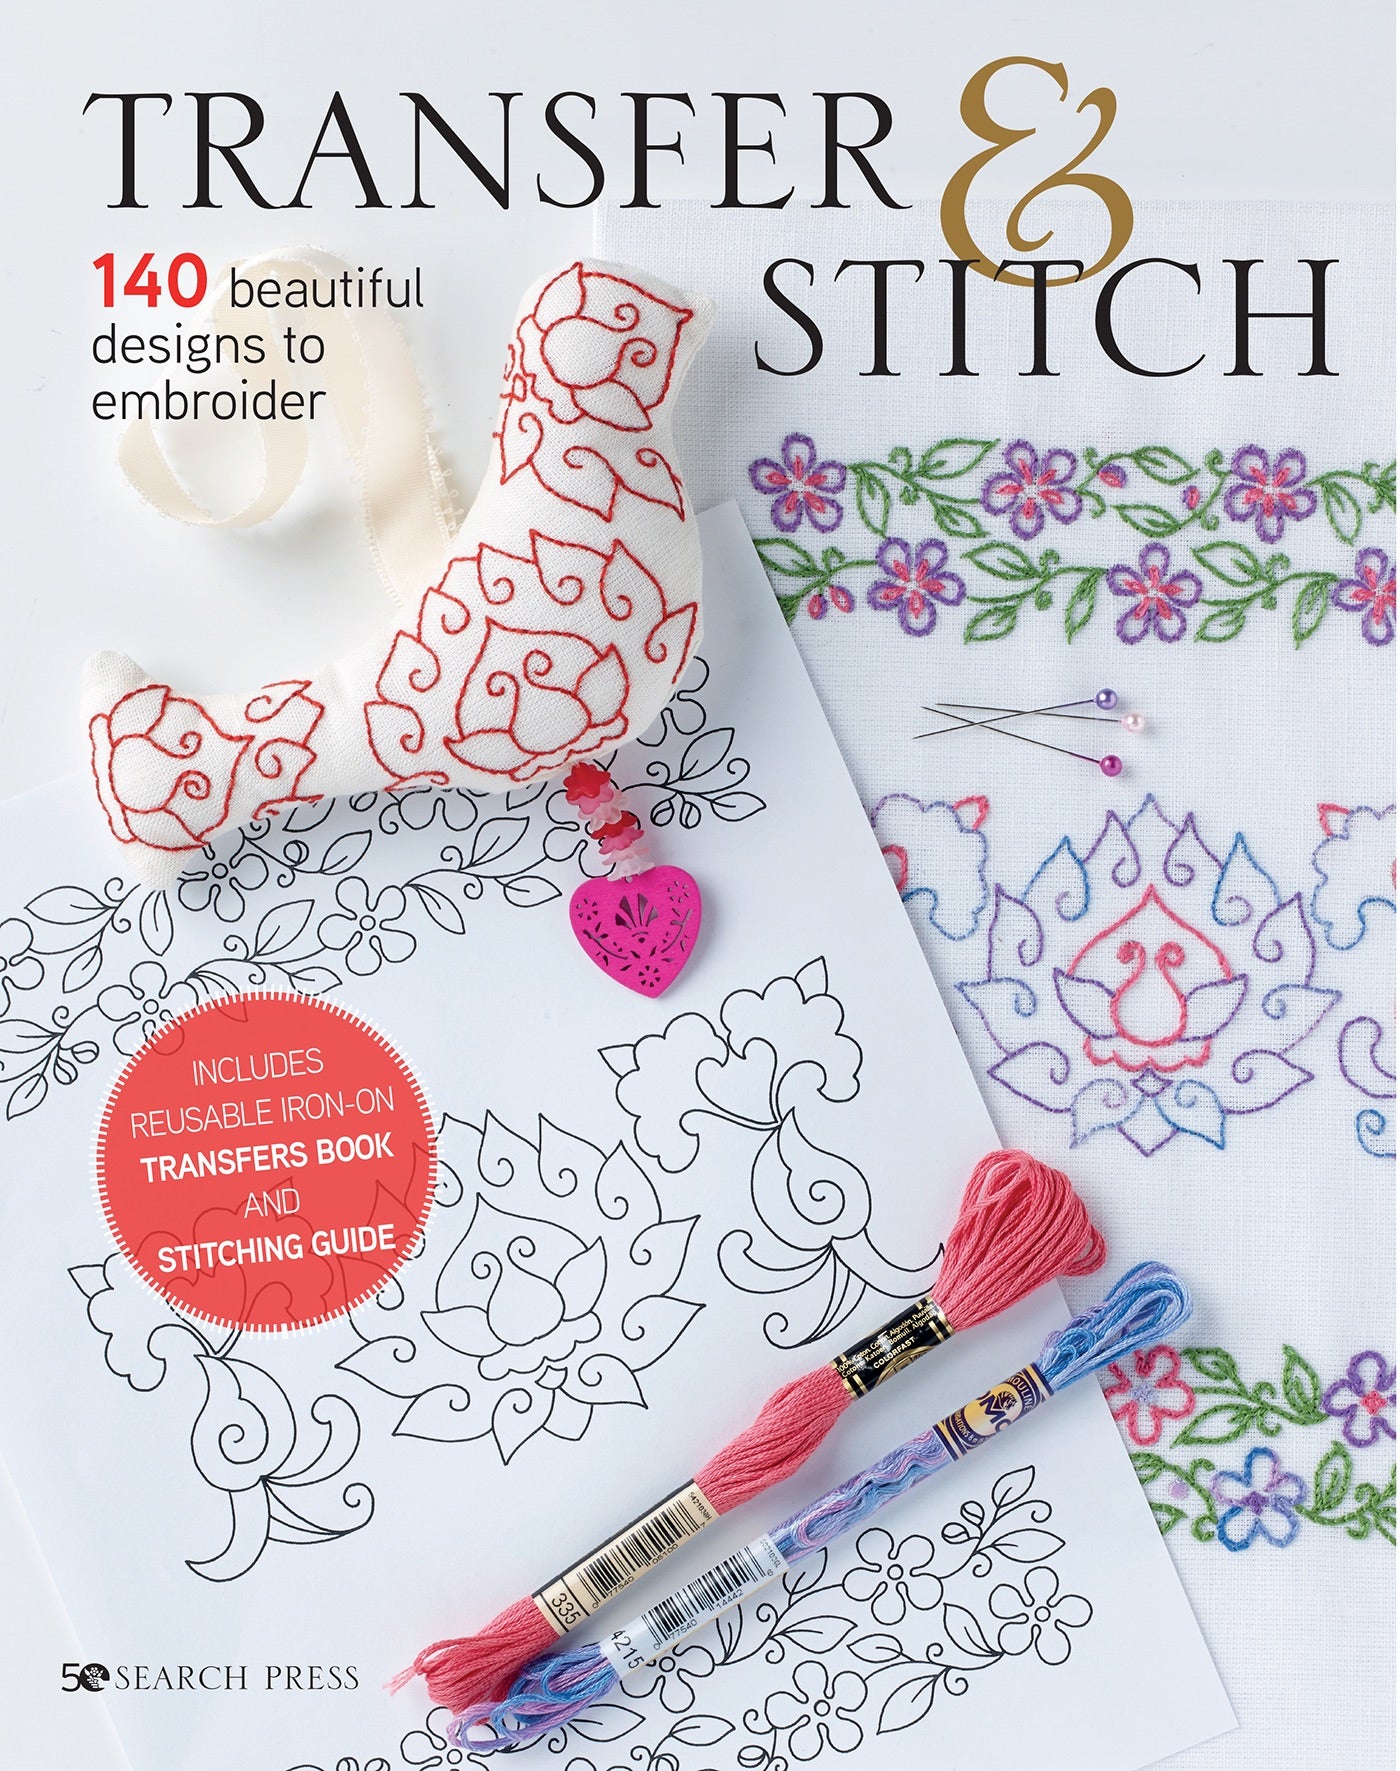 A-Z of Embroidery Stitches 2 [Book]